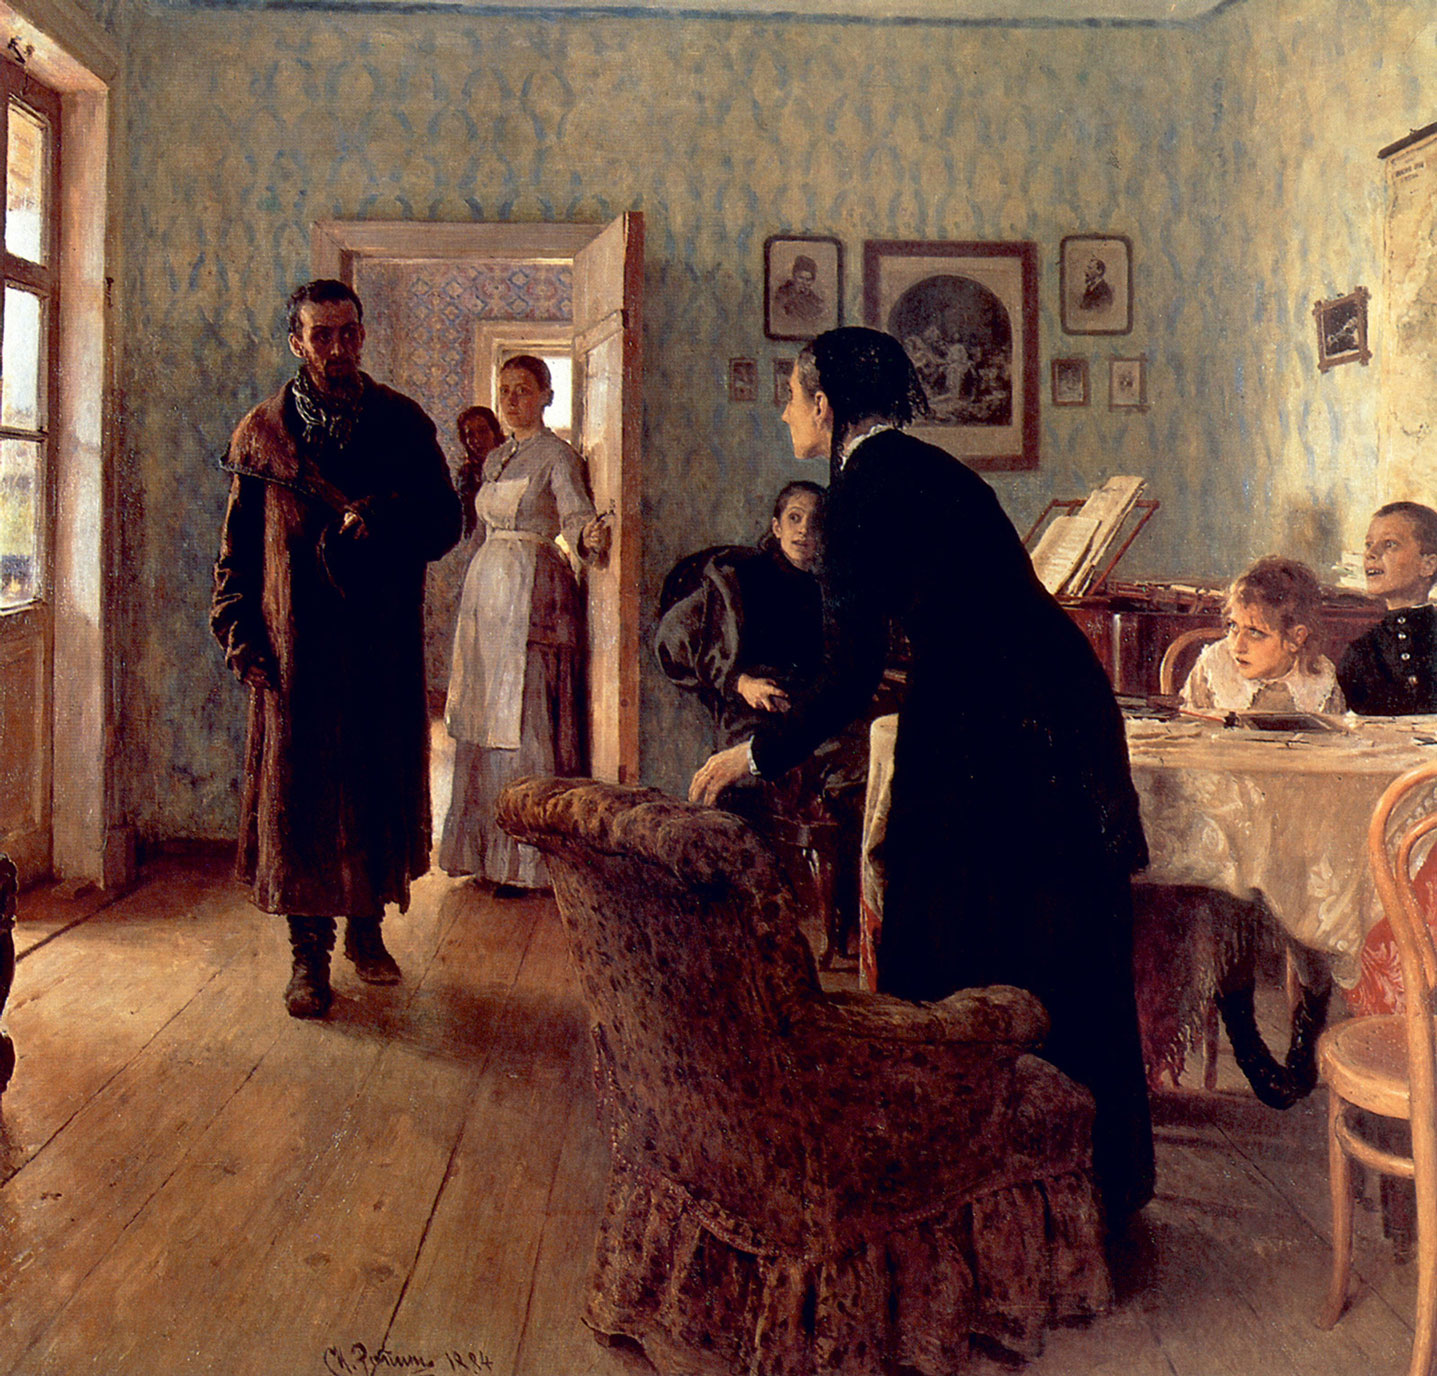 Ilya Repin’s eighteen eighty-four painting titled “An Unexpected Visitor.”